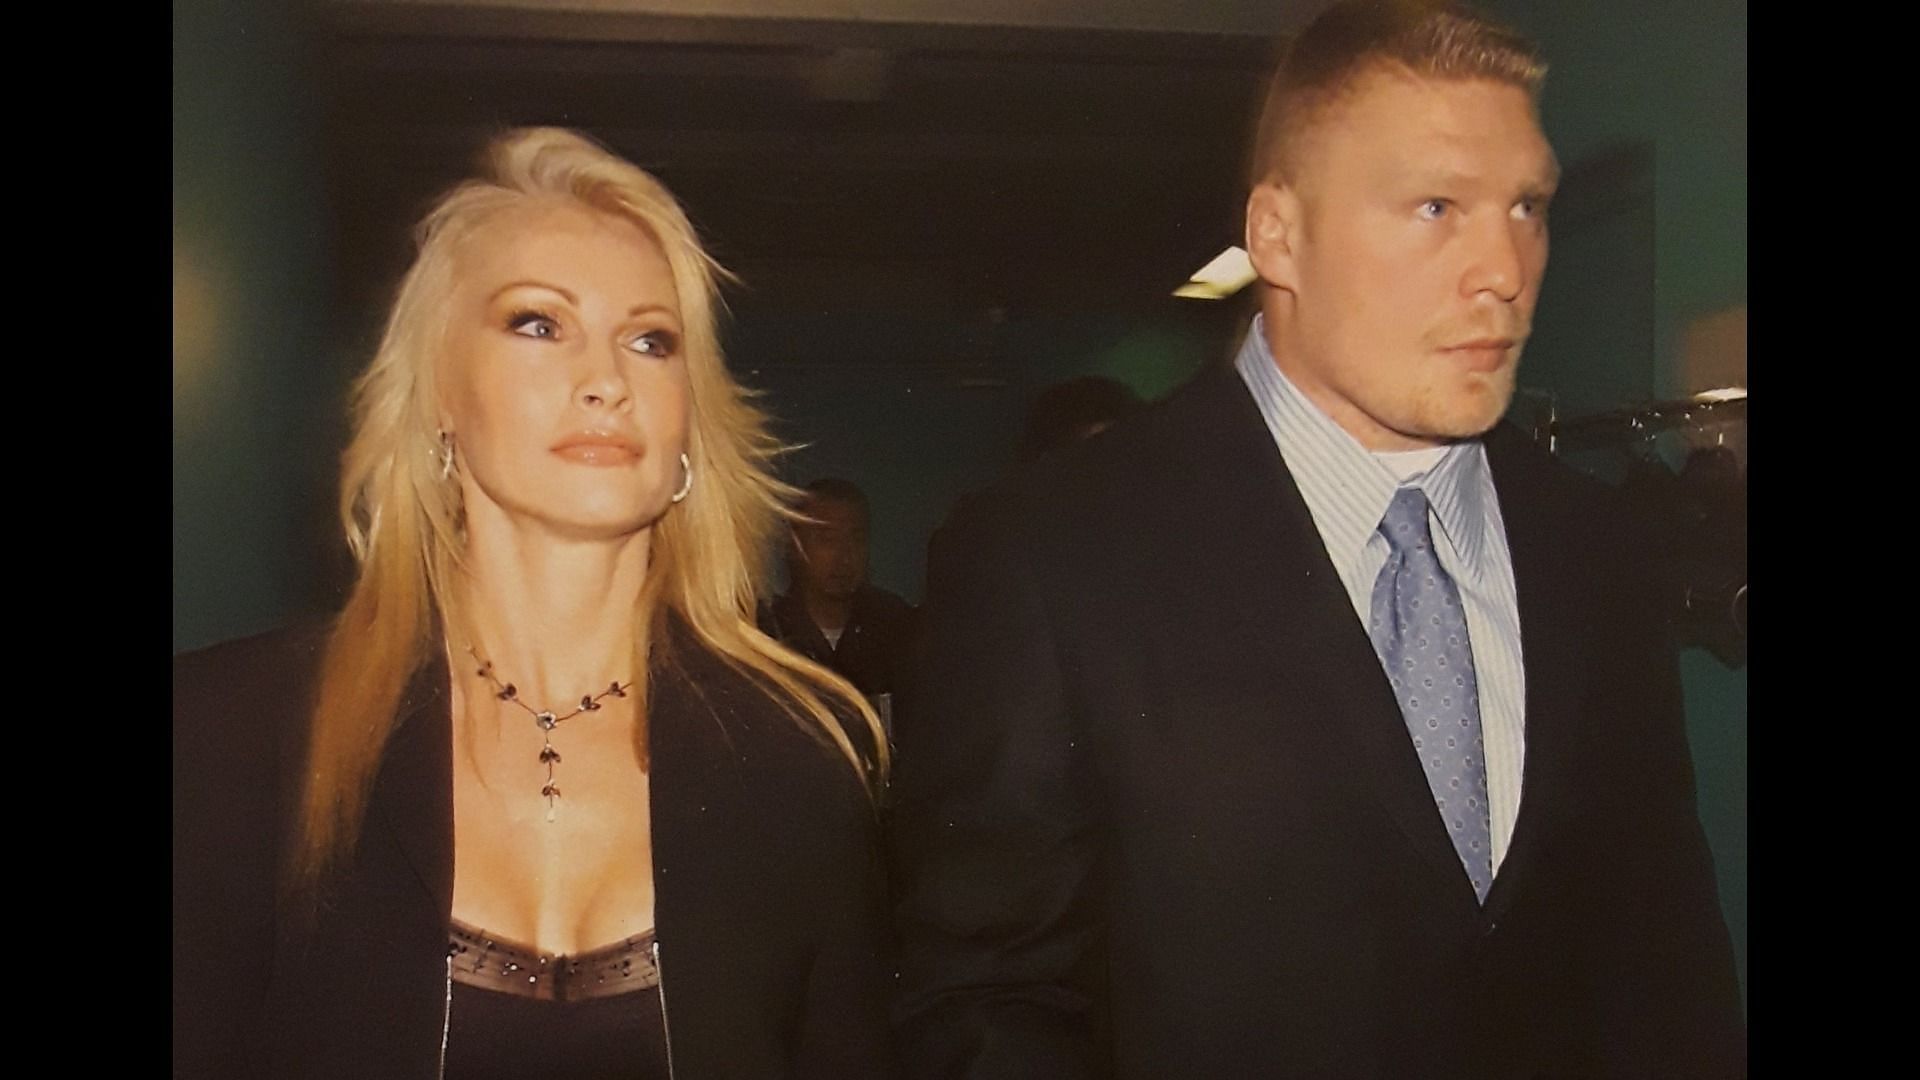 Here S Why Brock Lesnar And His Wife Sable Are Not Your Average Wwe Couple